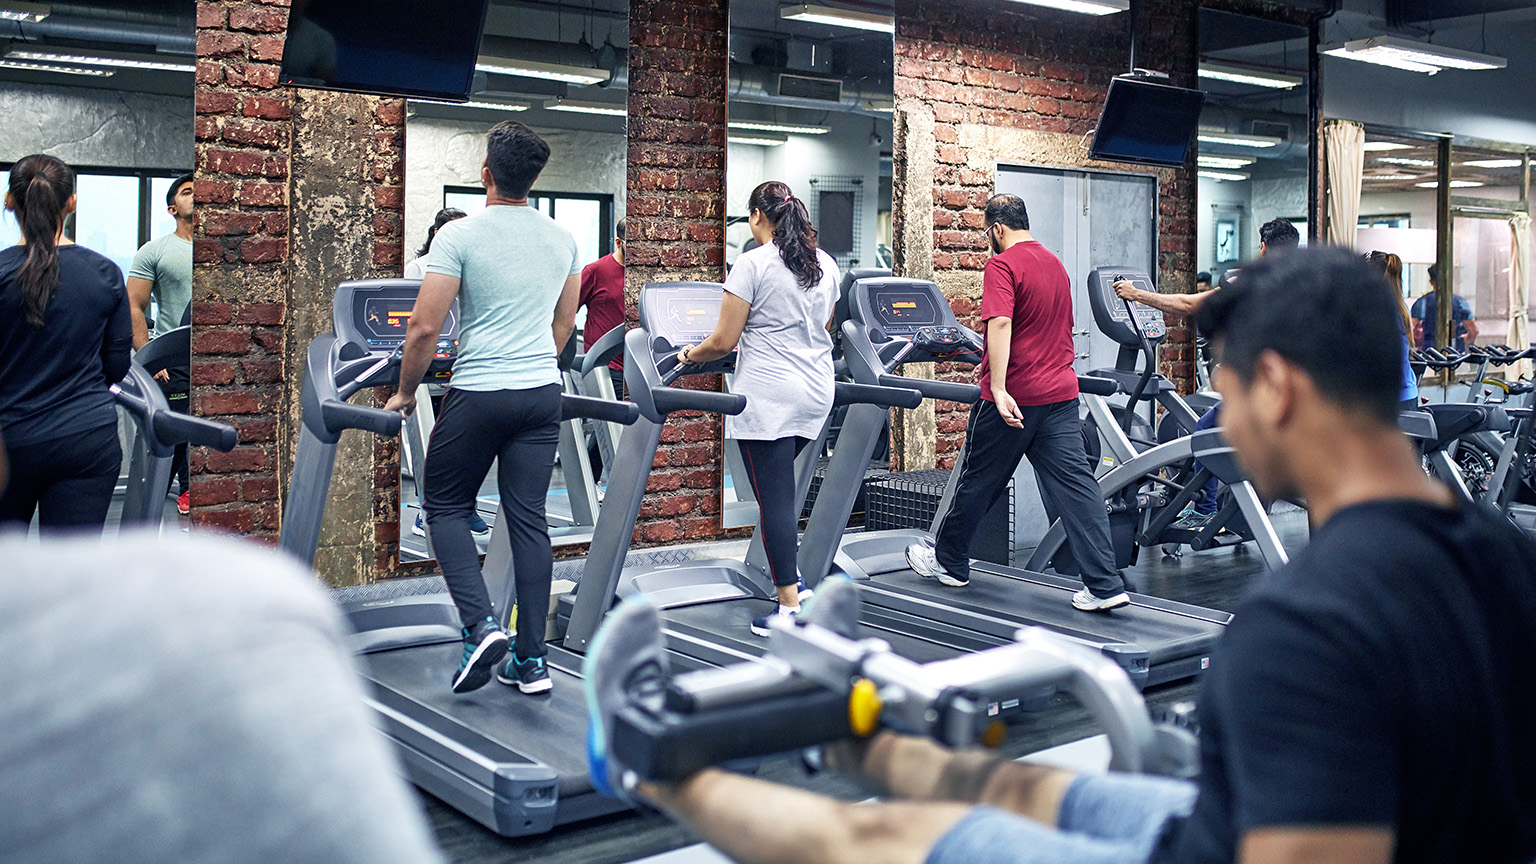 People using treadmills and workout equipment in a modern fitness center in India.